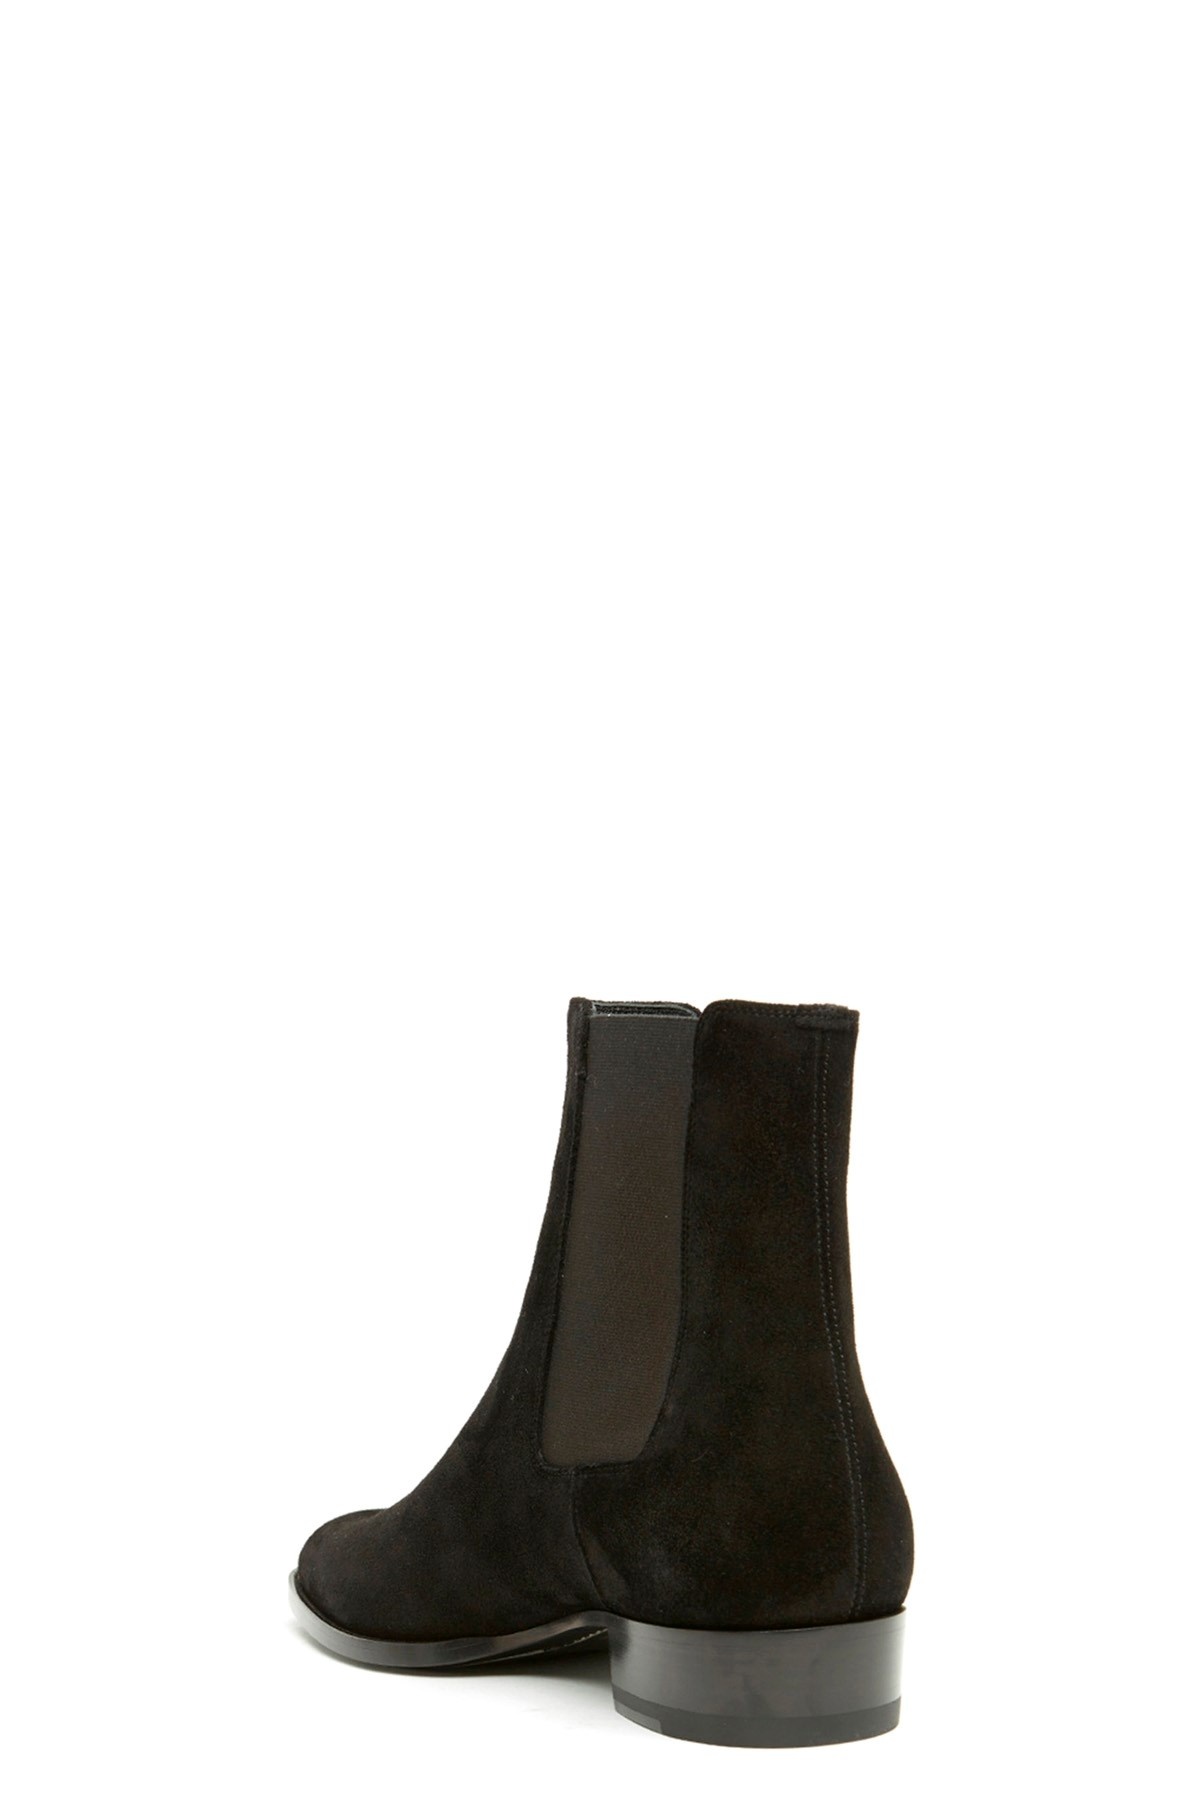 'Wyatt' ankle boots - 2